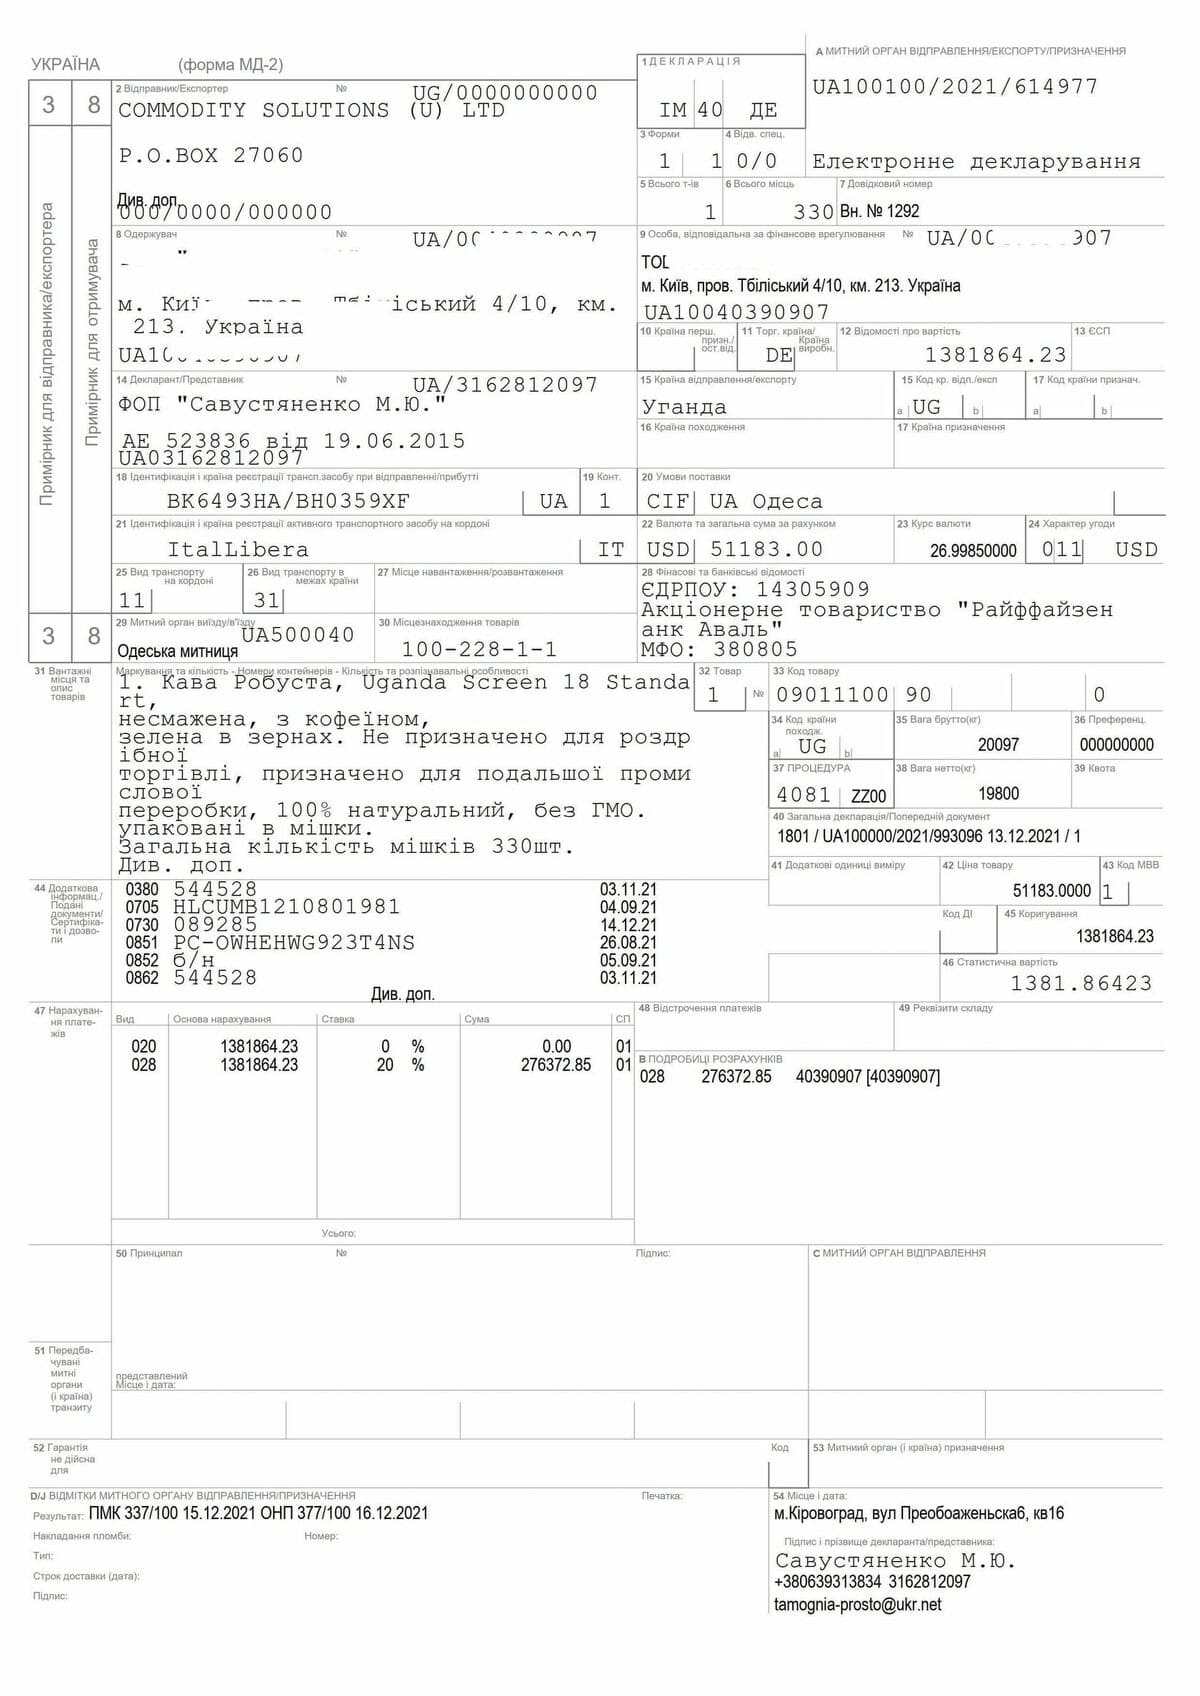 Sample of filling out the customs declaration MD-2 - DiFFreight